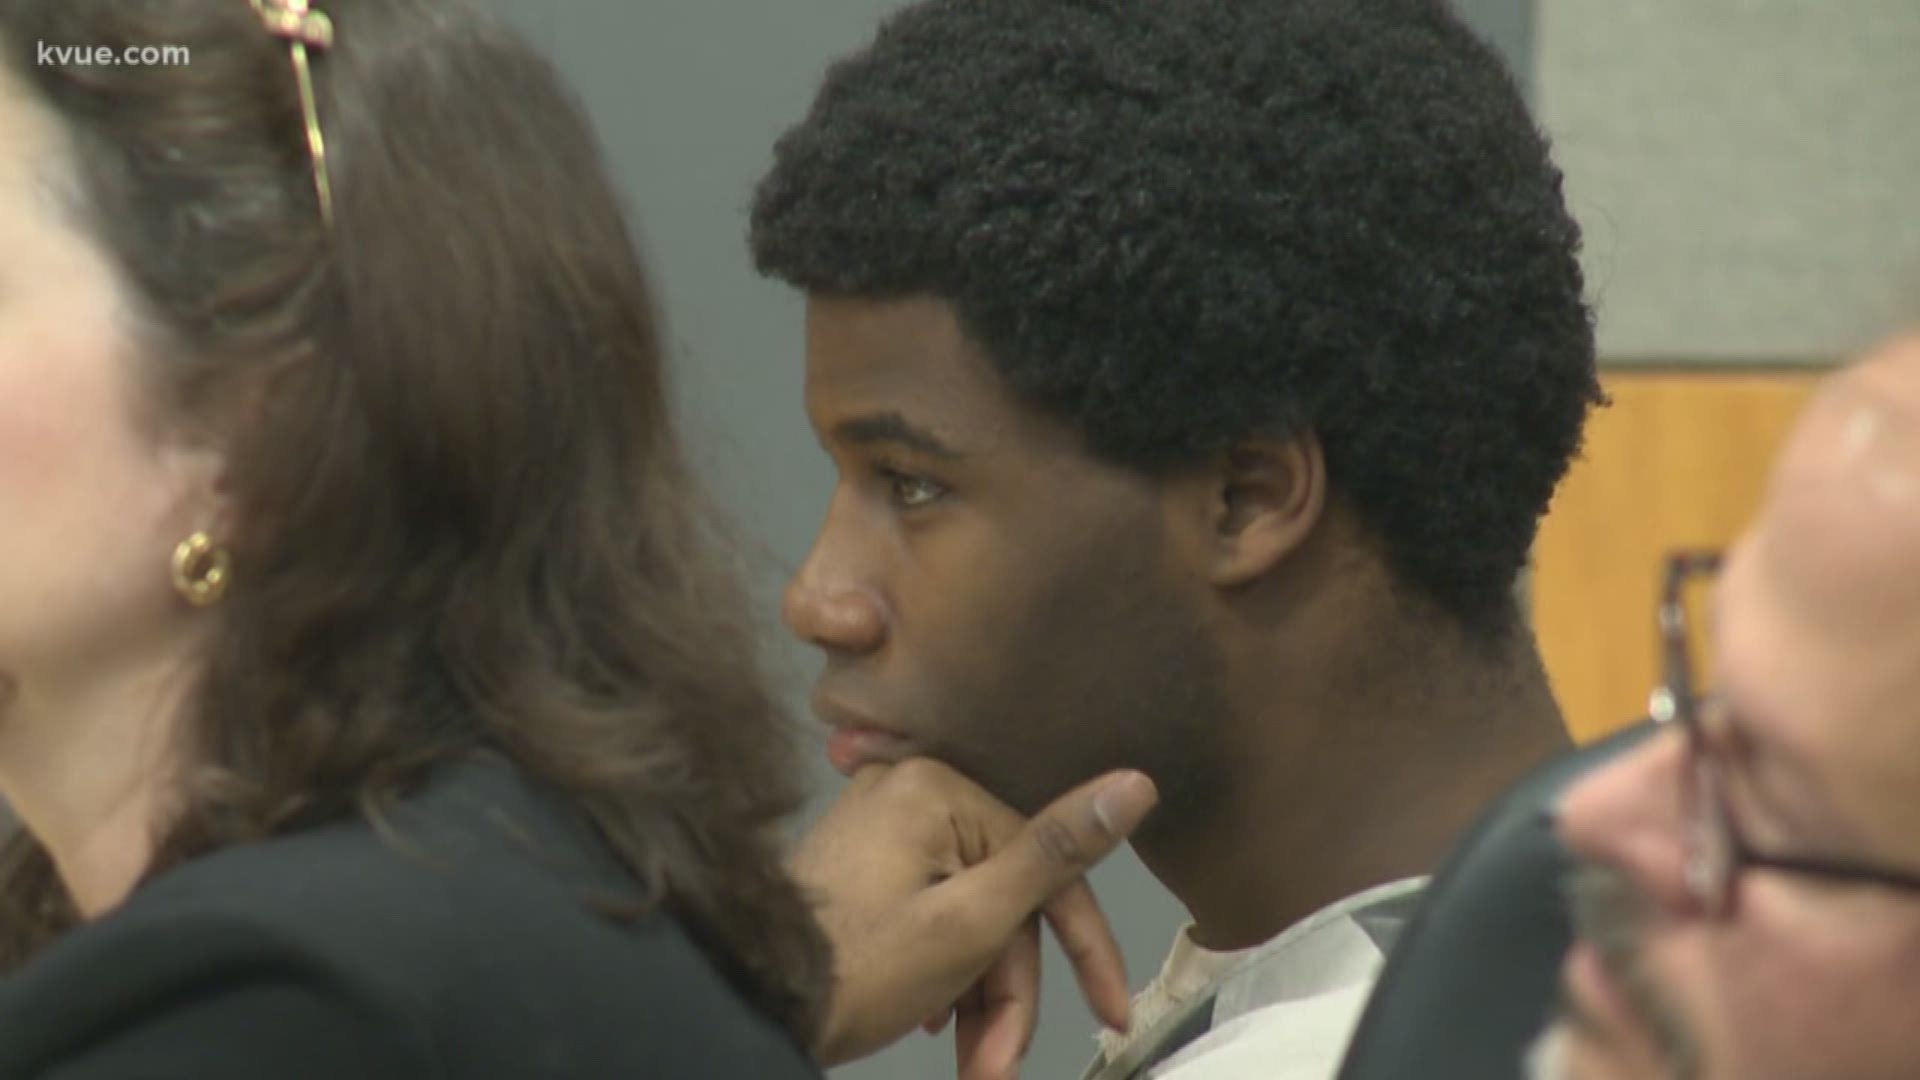 A judge ruled that the suspect's trial may not last longer than two weeks. Meechaiel Criner is accused of killing an 18-year-old University of Texas at Austin student in 2016.